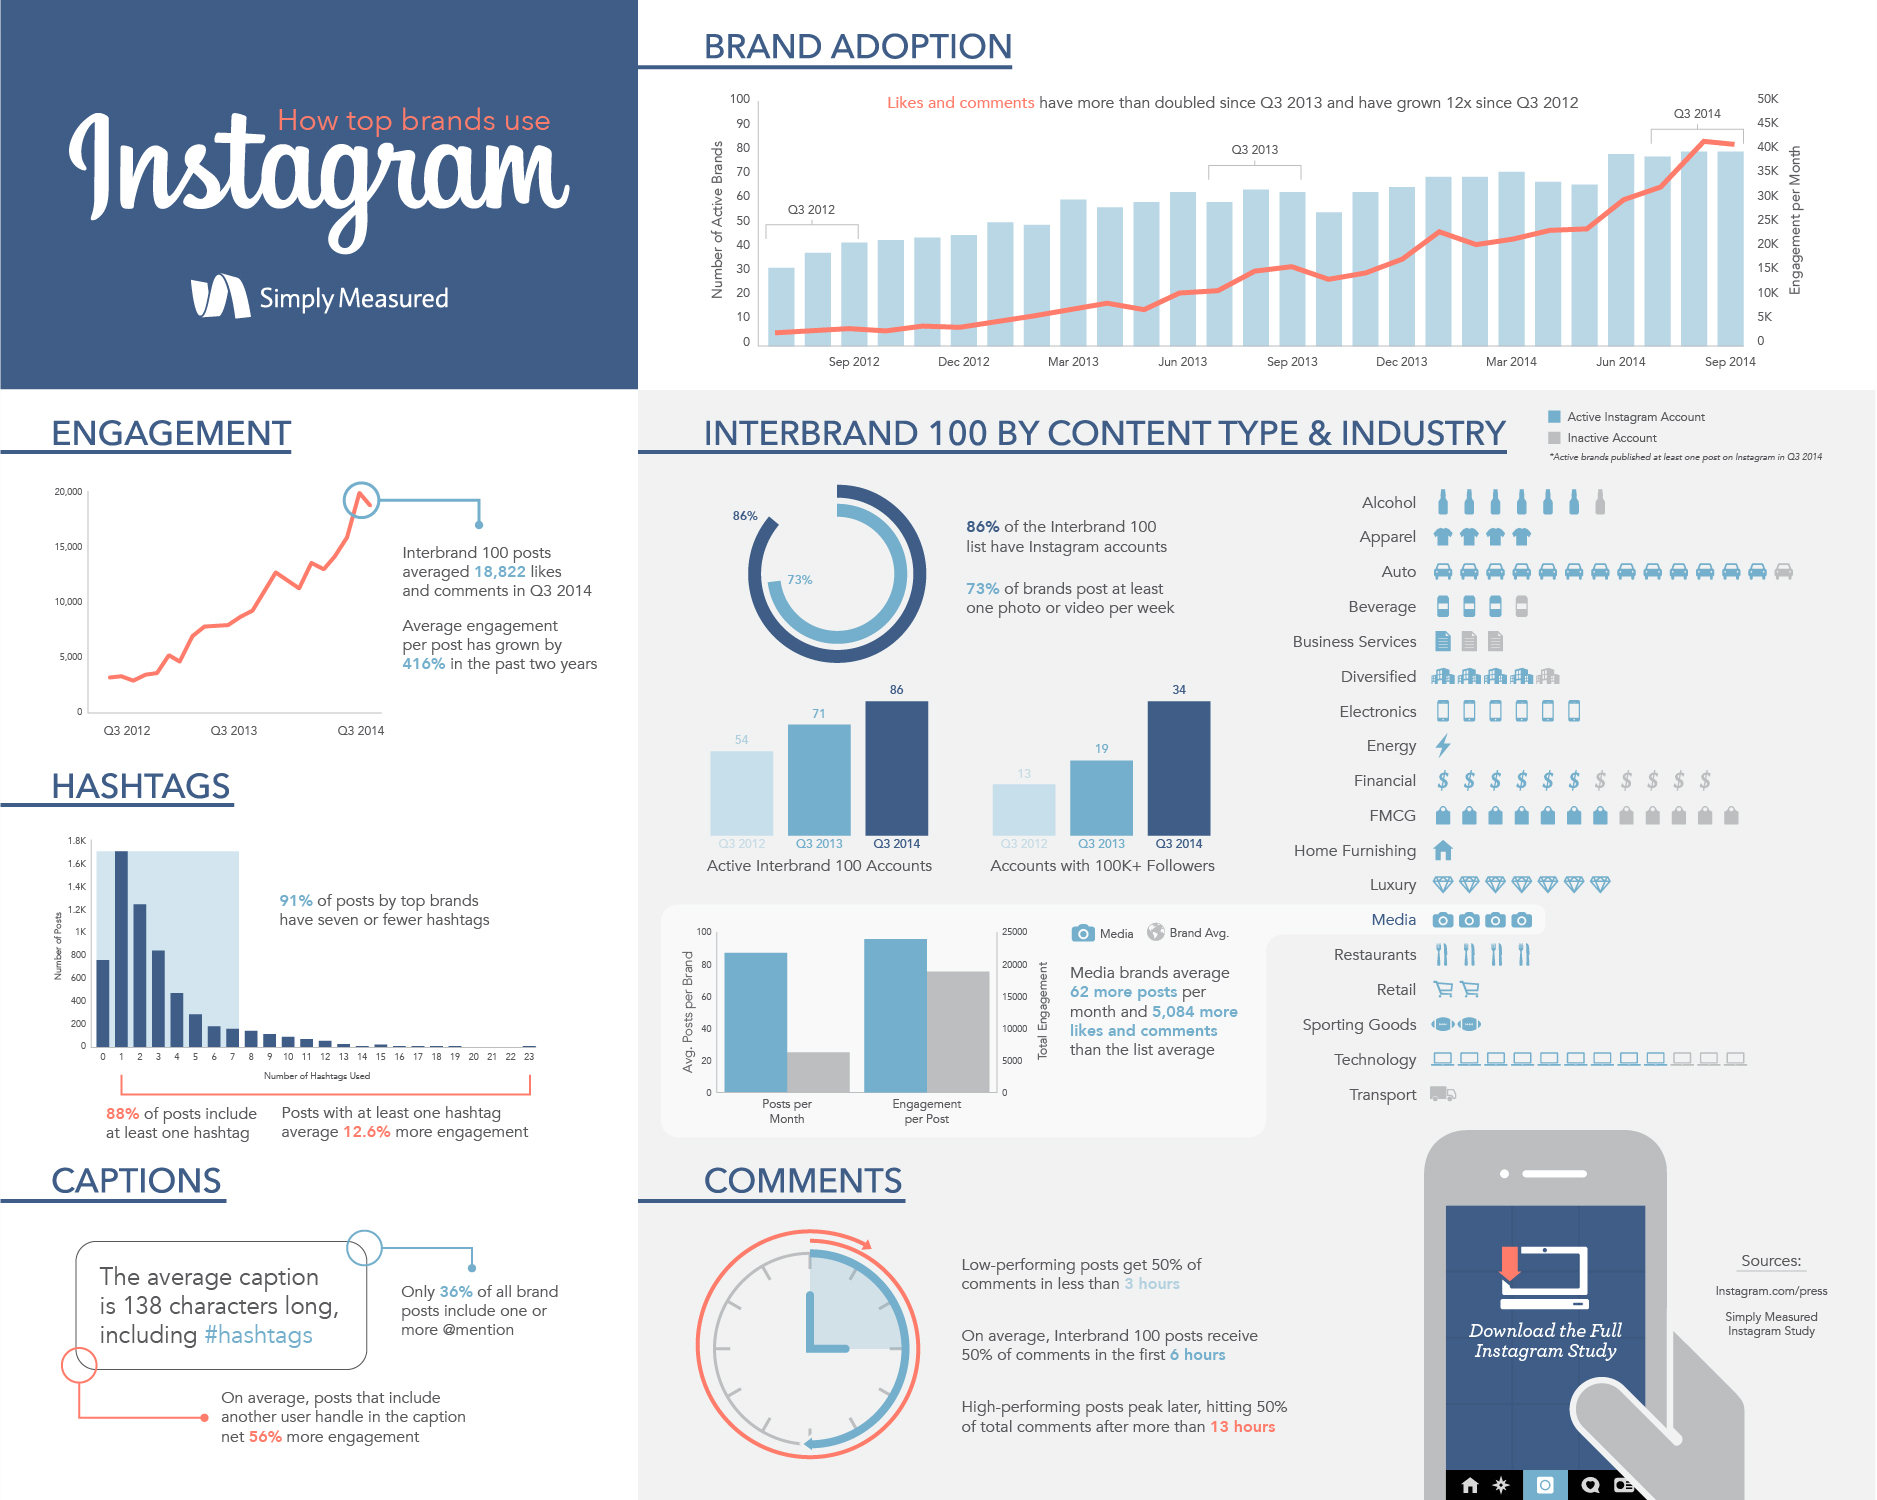 infographic-shows-instagram-engagement-per-post-up-416-in-just-two-years